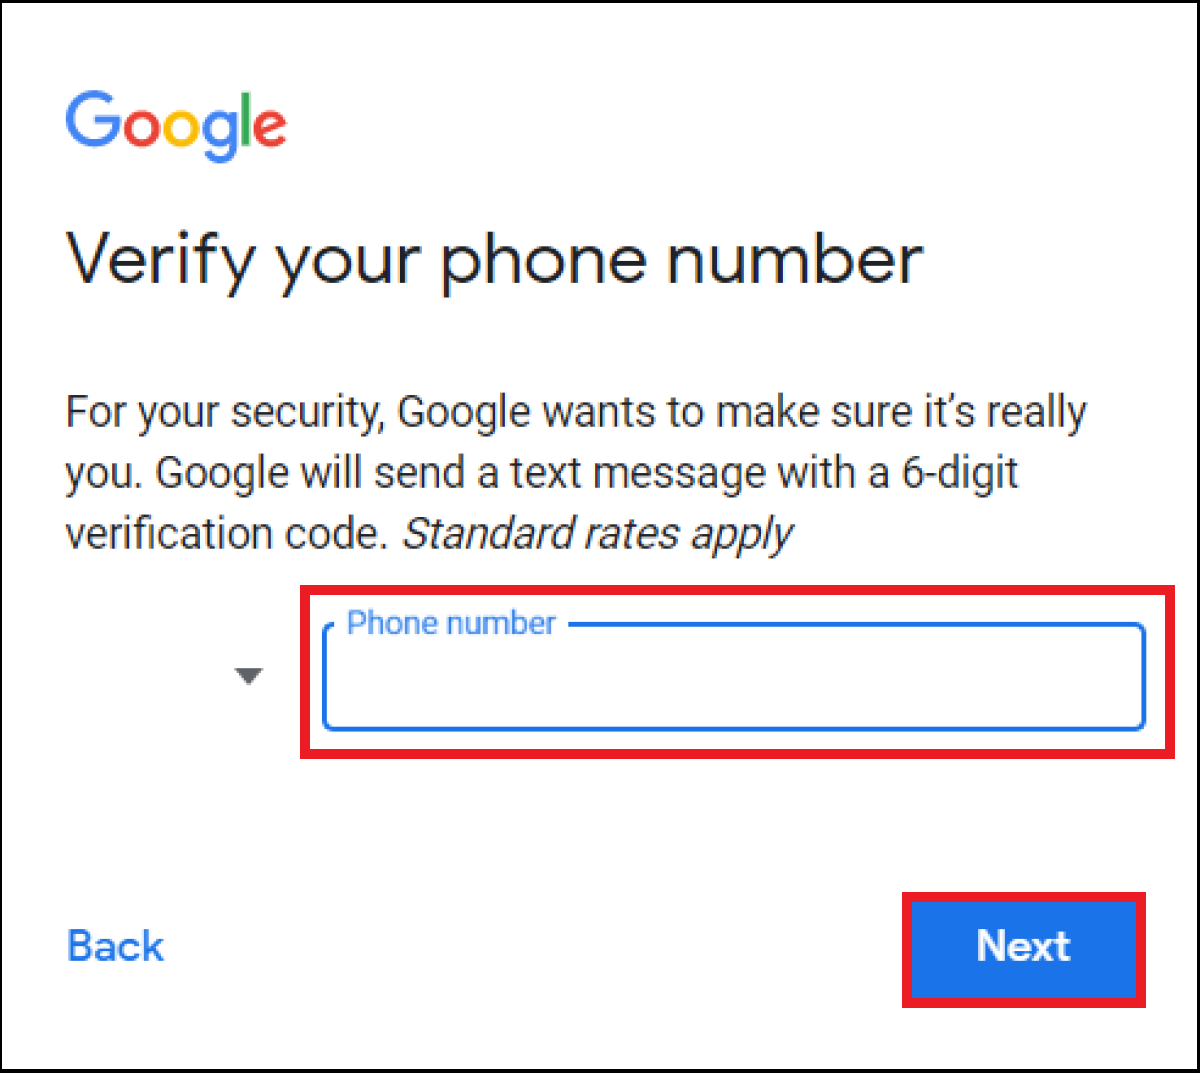 The Google registration page for entering further required user data